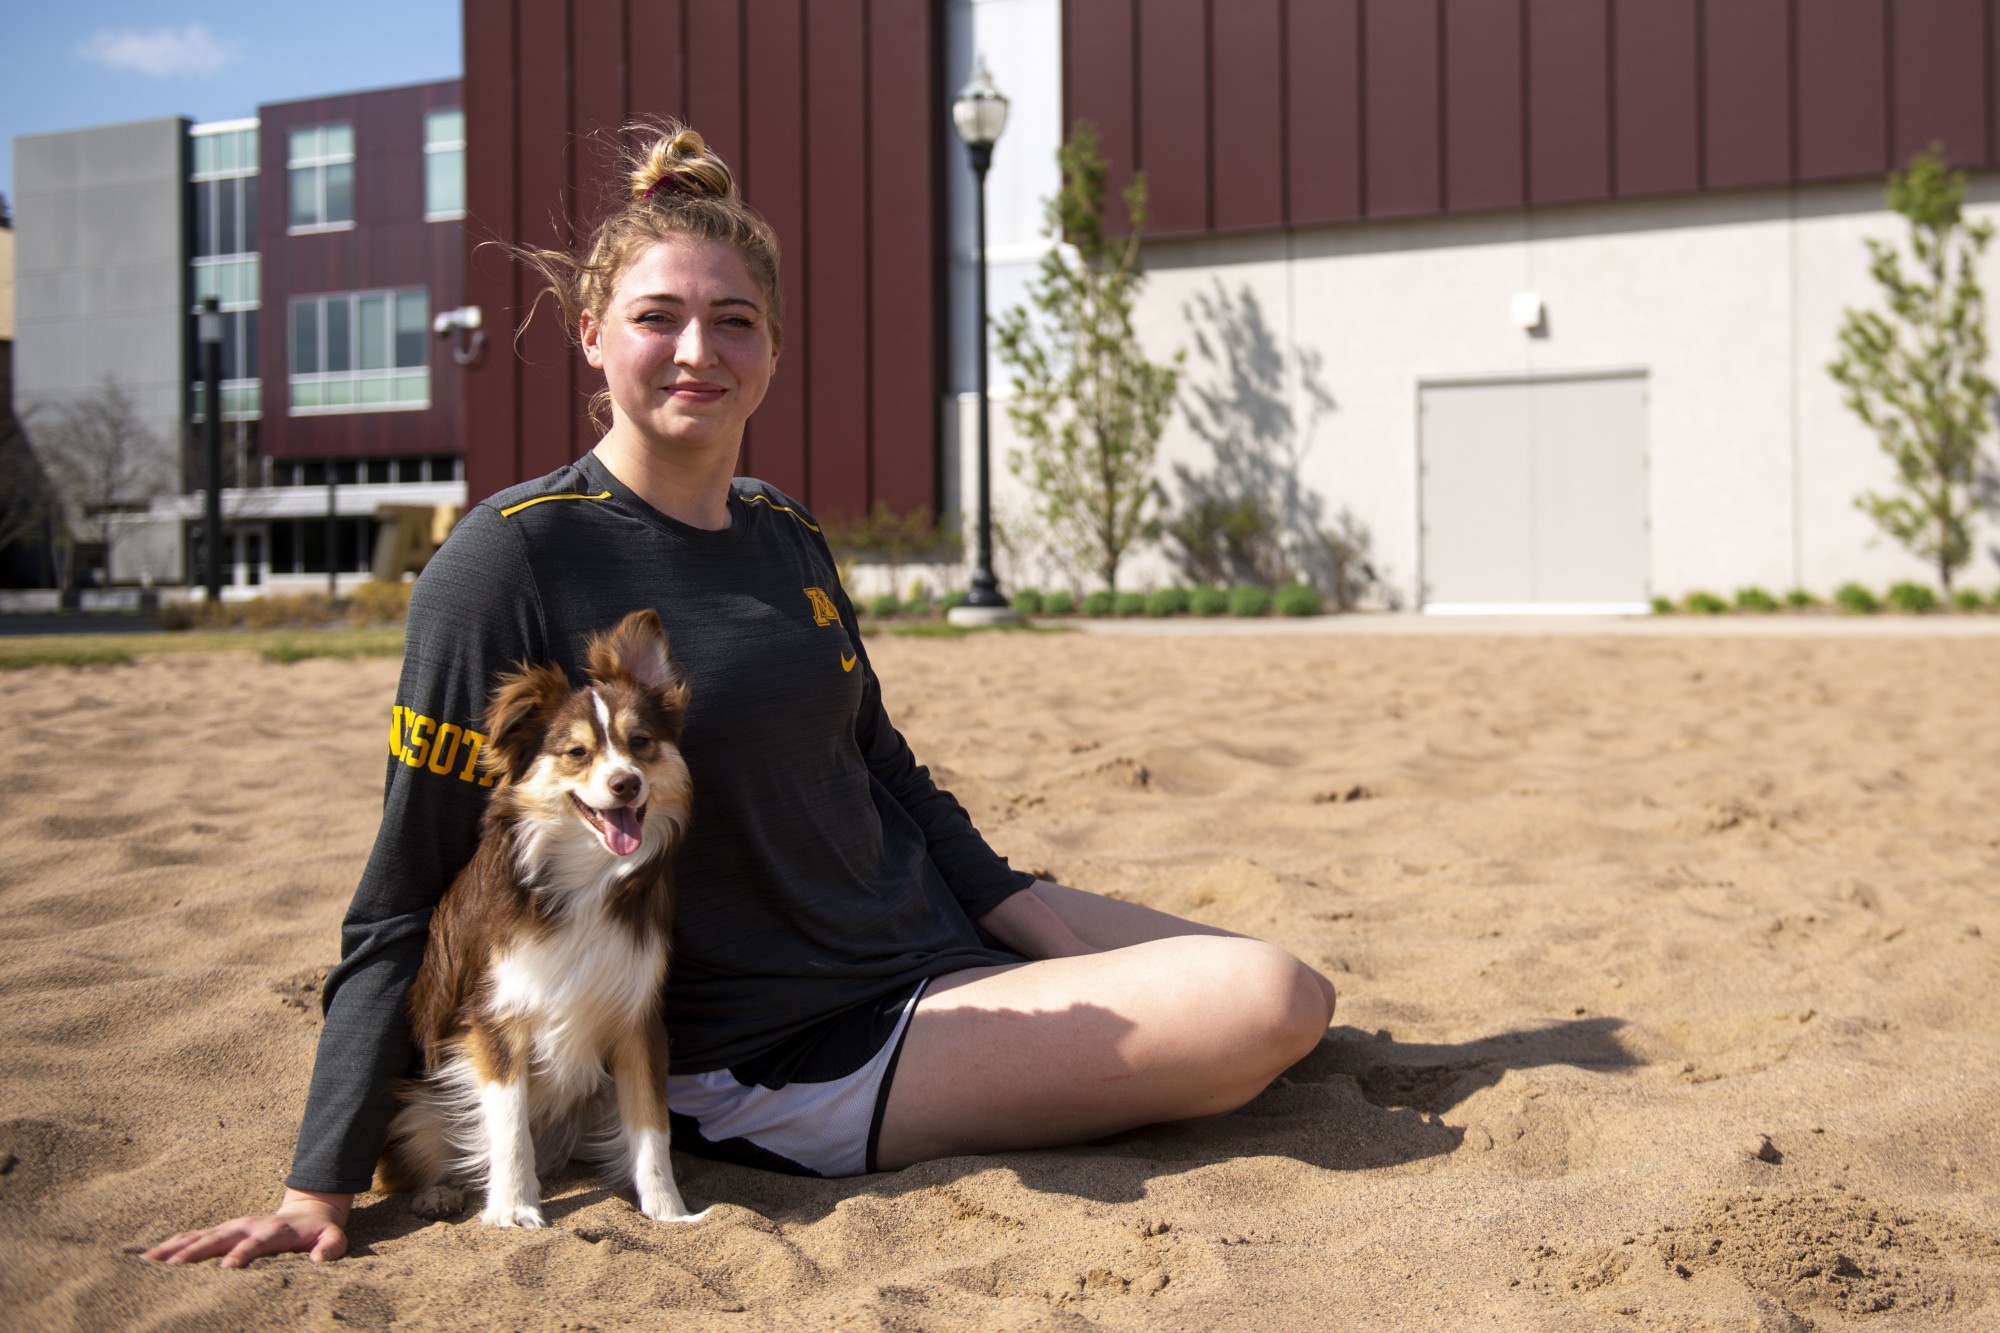 4:14 p.m.
Regan Pittman poses for a portrait with her dog, Earl, at the volleyball court in athletes village, now devoid of nets. Pittman, who still has one more year of eligibility with the volleyball team, is unsure of whether or not she will need to continue training. Earl, however, helps Pittman to smile and laugh everyday without even having to think about it. 